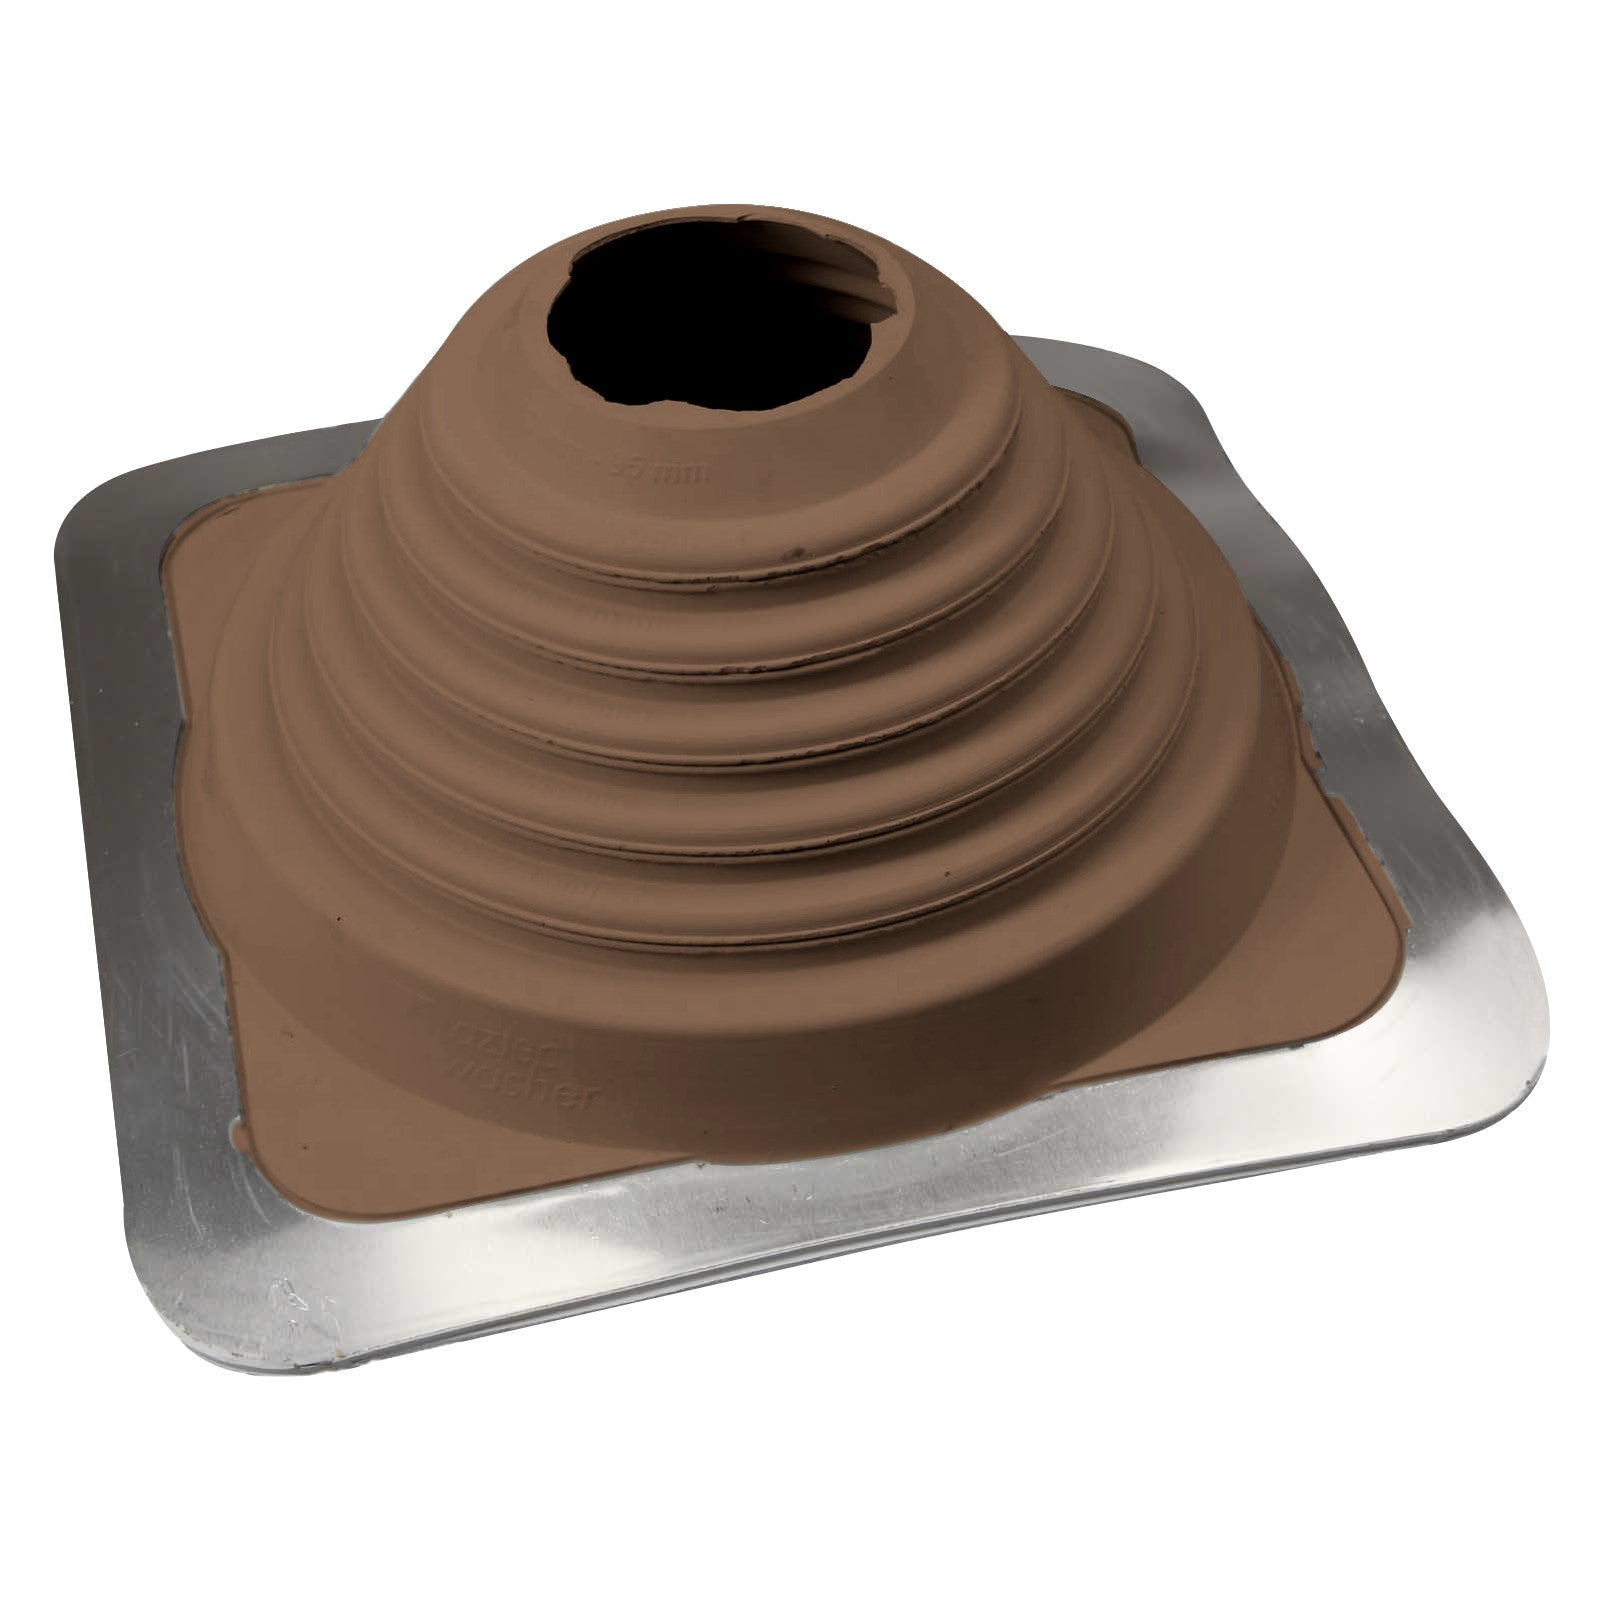 #4 Roofjack Square EPDM Pipe Flashing Boot Brown